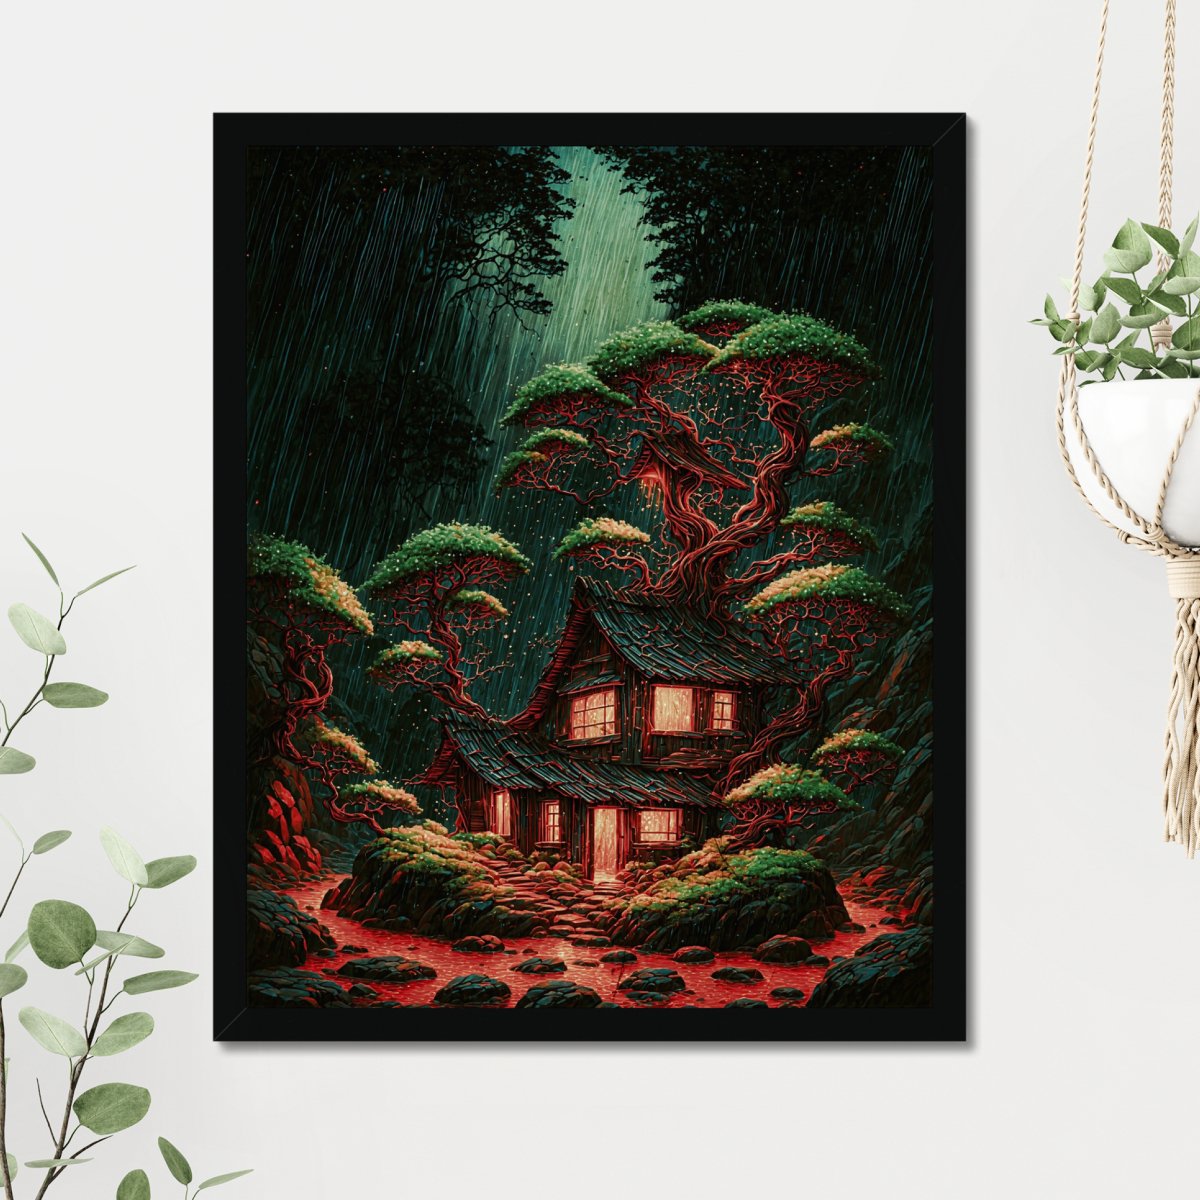 Overgrown brood - Art print - Poster - Ever colorful